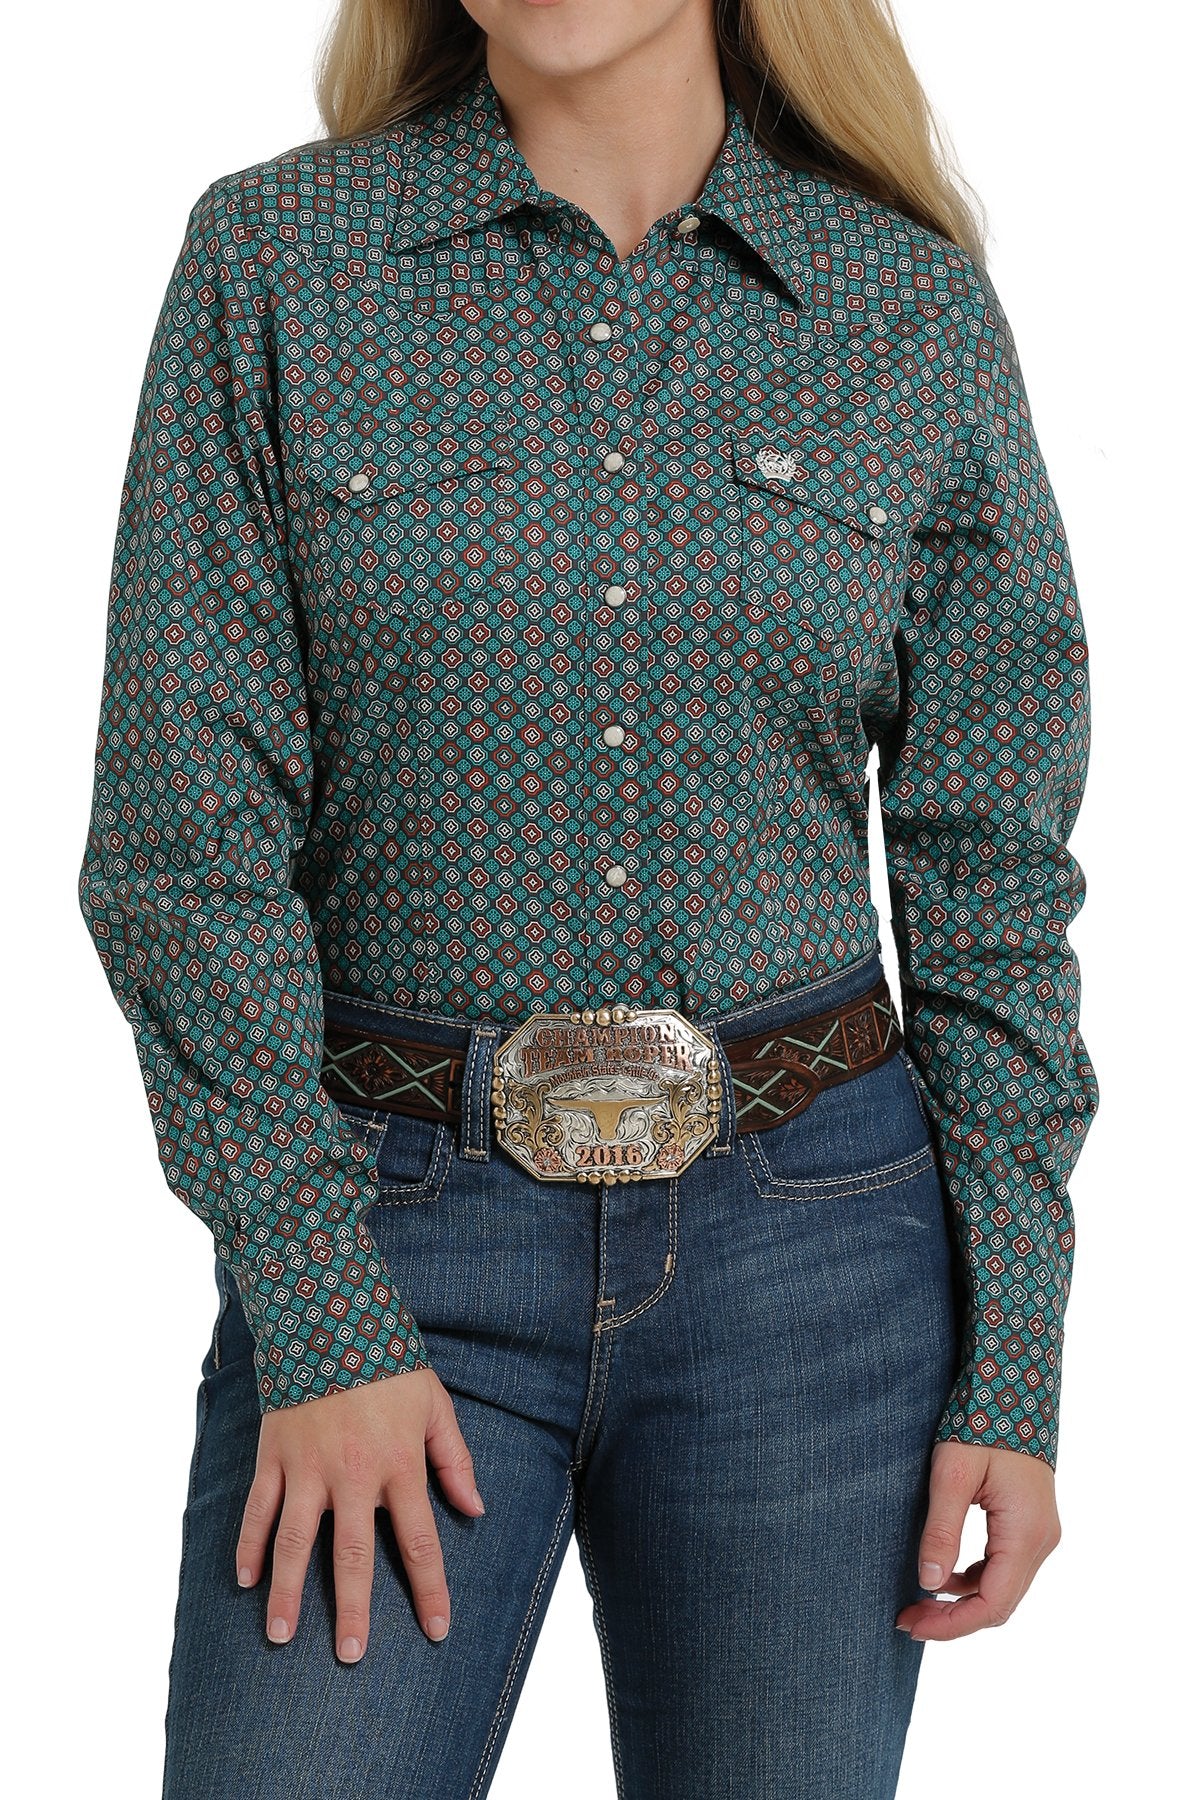 Cinch Ladies Snap Front Multi Western L/S Shirt - MSW9201027 - On Sale